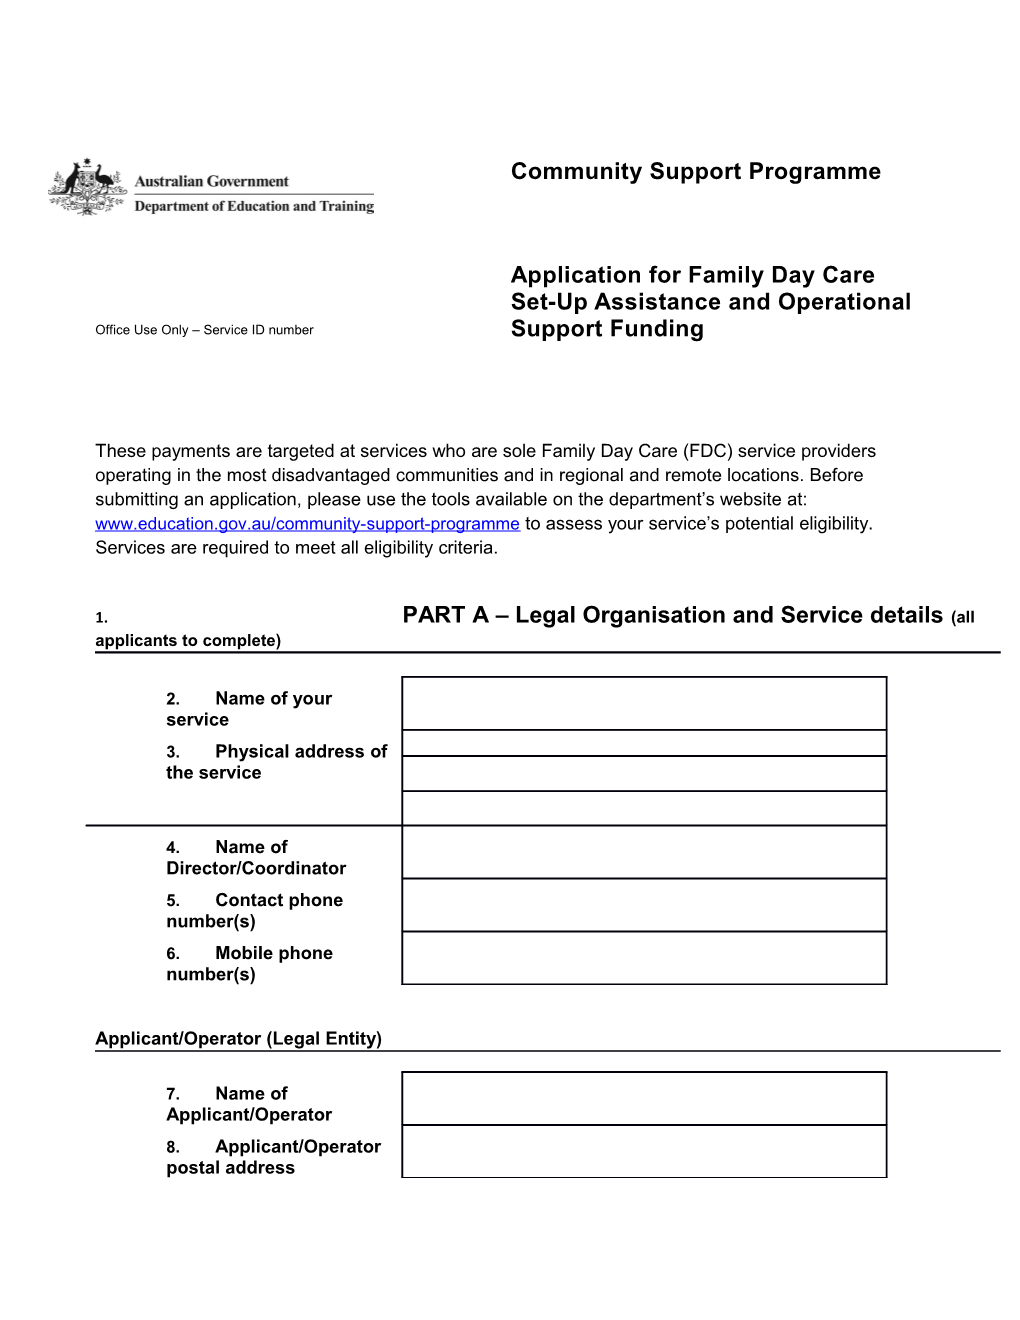 PART a Legal Organisation and Service Details(All Applicants to Complete)